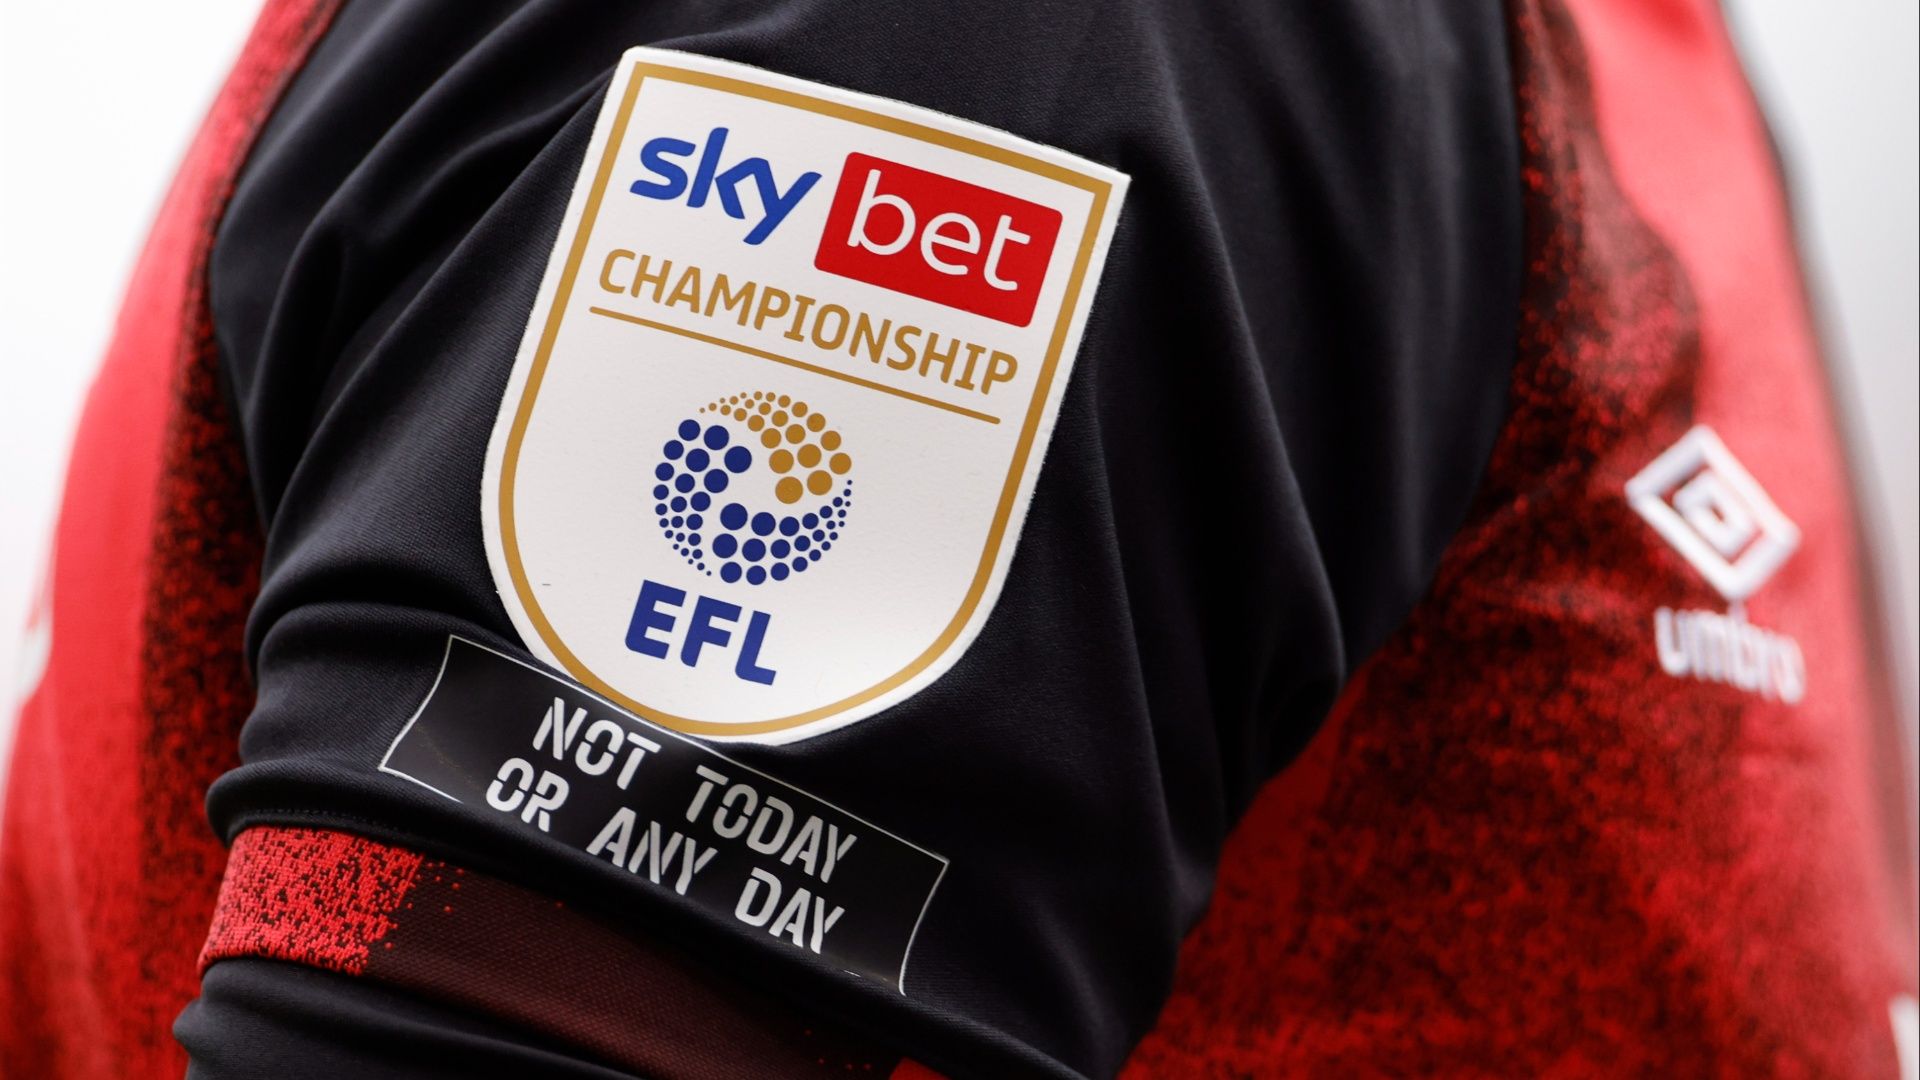 Sky Bet Championship, Brands of the World™